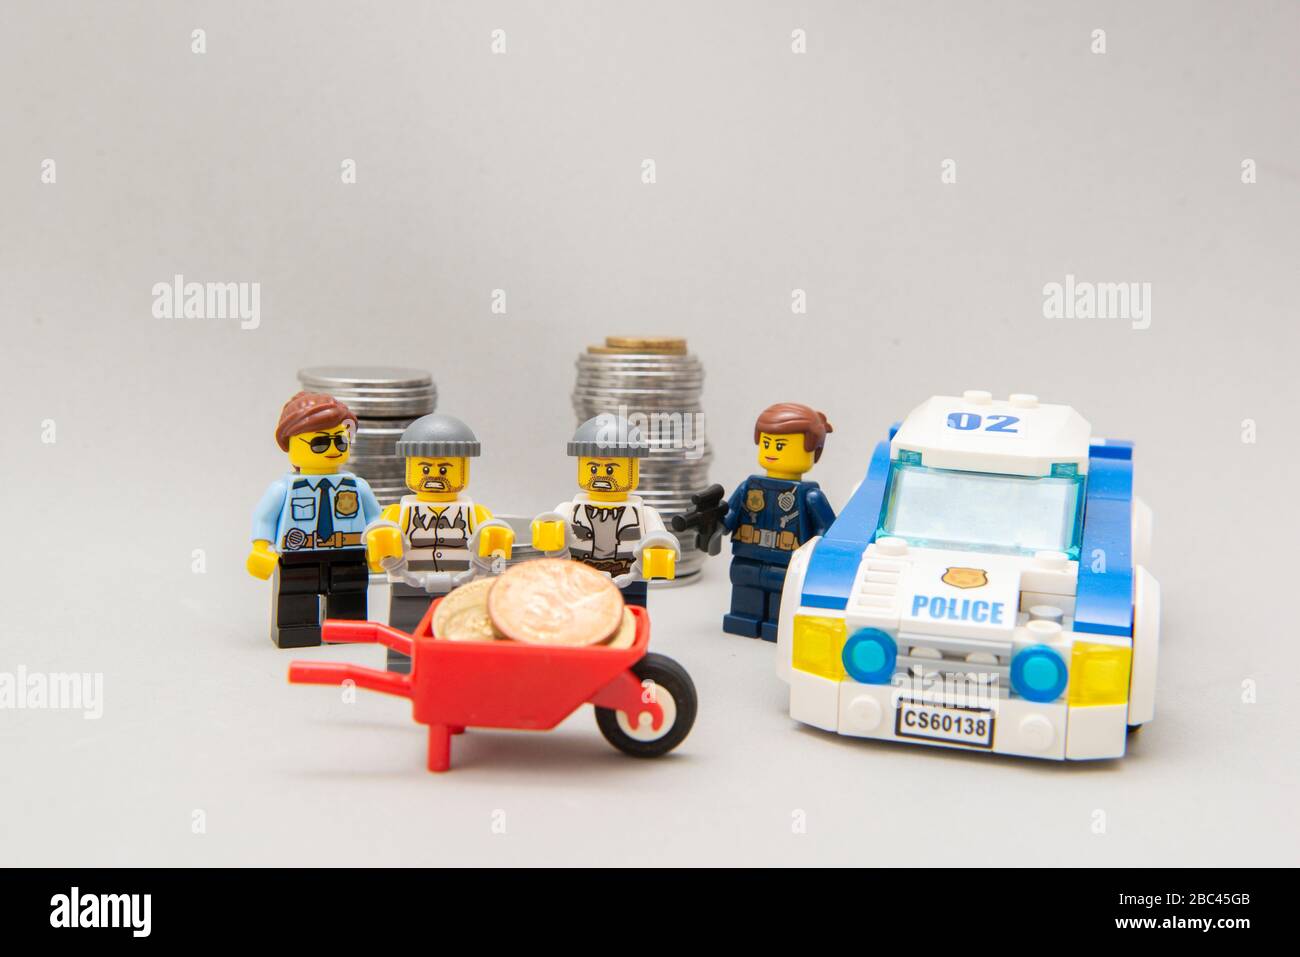 Florianopolis, Brazil, March 28, 2020: Police arresting bandits in the act. Thieves handcuffed and arrested by the police force. Selective focus. Lego Stock Photo